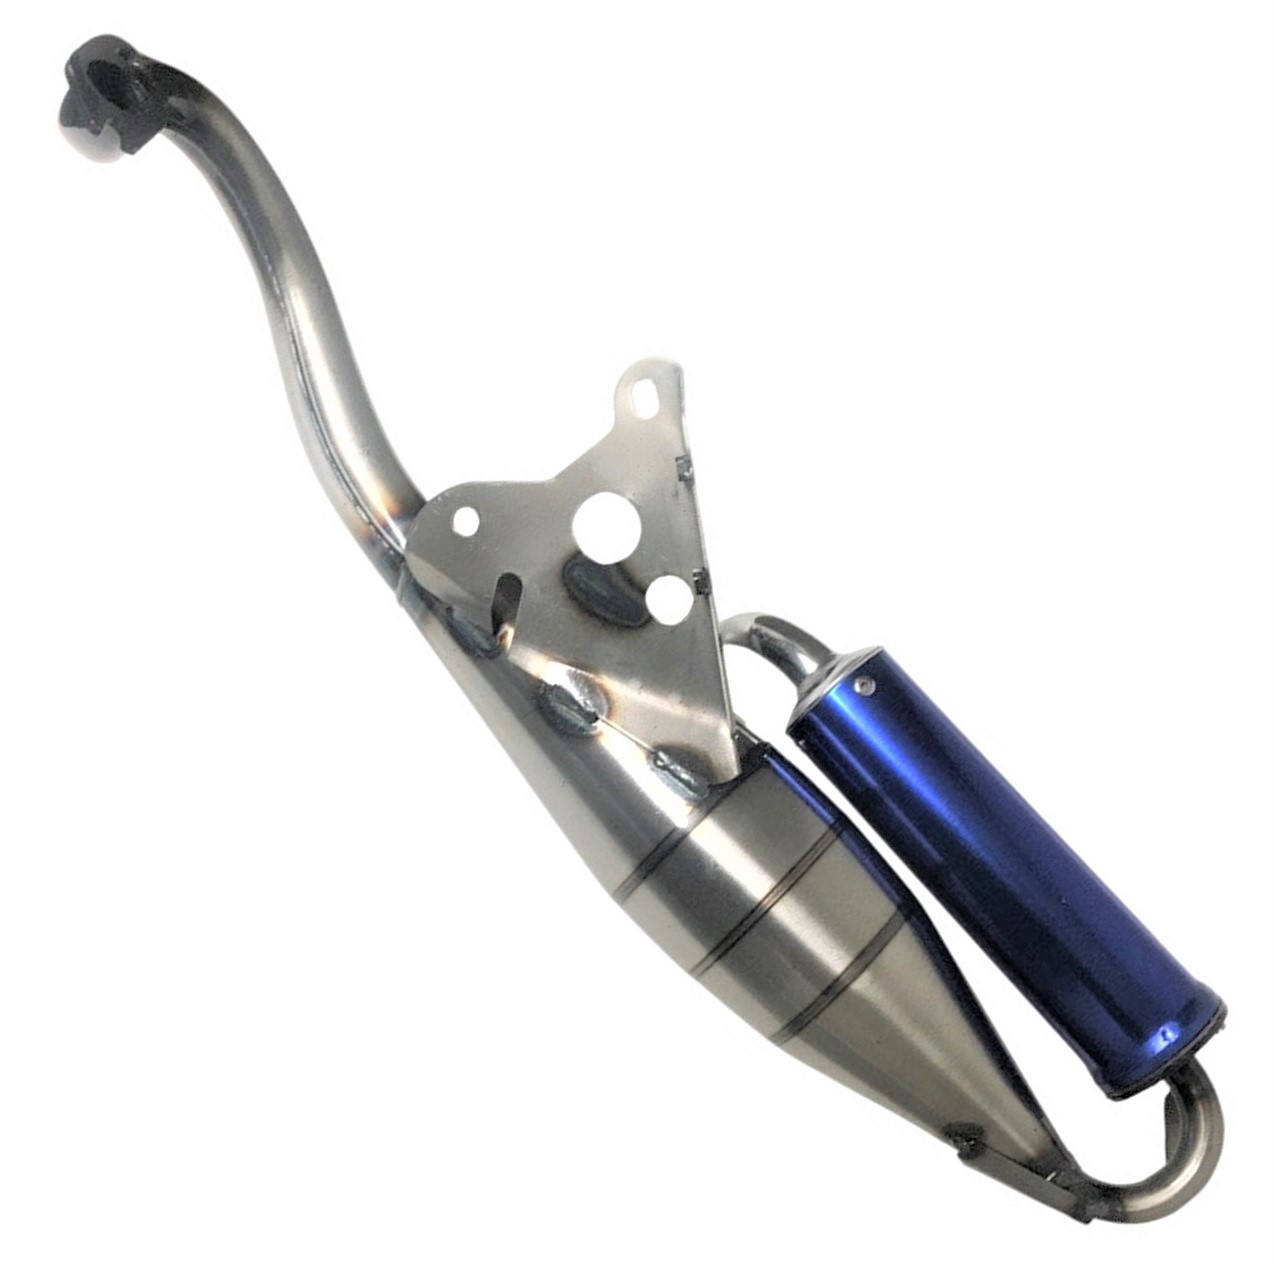 High Performance 2 Stroke Exhaust Fits Most Eton, Vento, Jog, Kymco, 50cc Scooters with the Minarelli - Jog Type Engine. Fits many other brands as well.